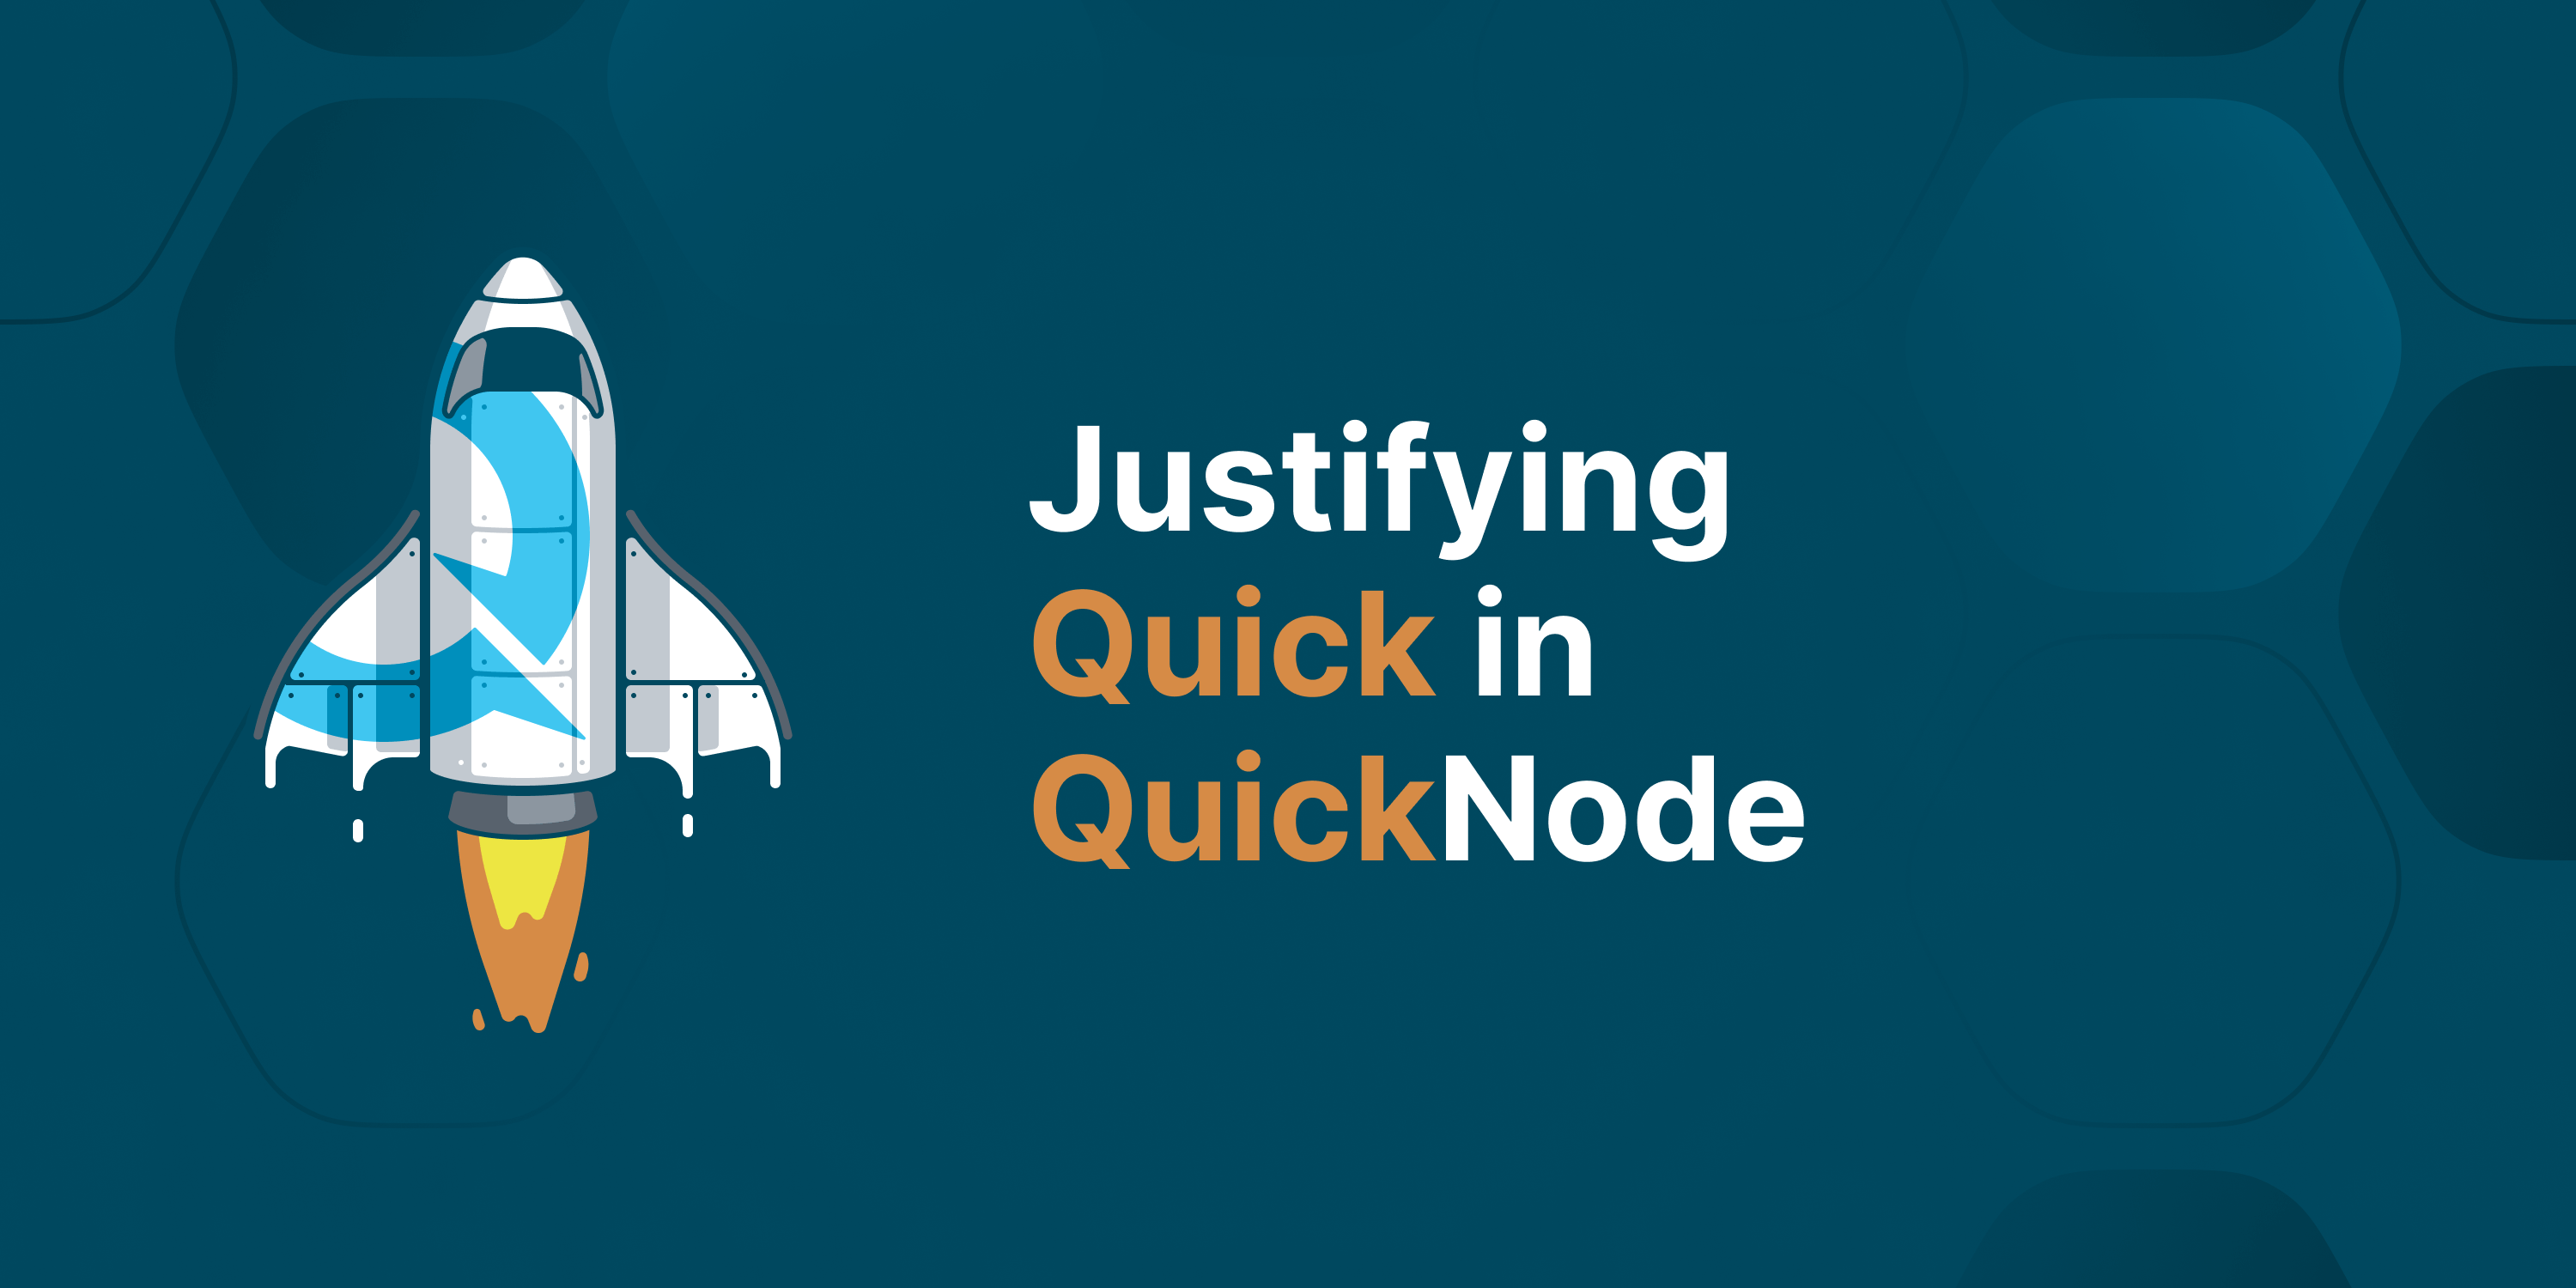 Justifying Quick in QuickNode: A Response Time Comparison of Blockchain Node Providers